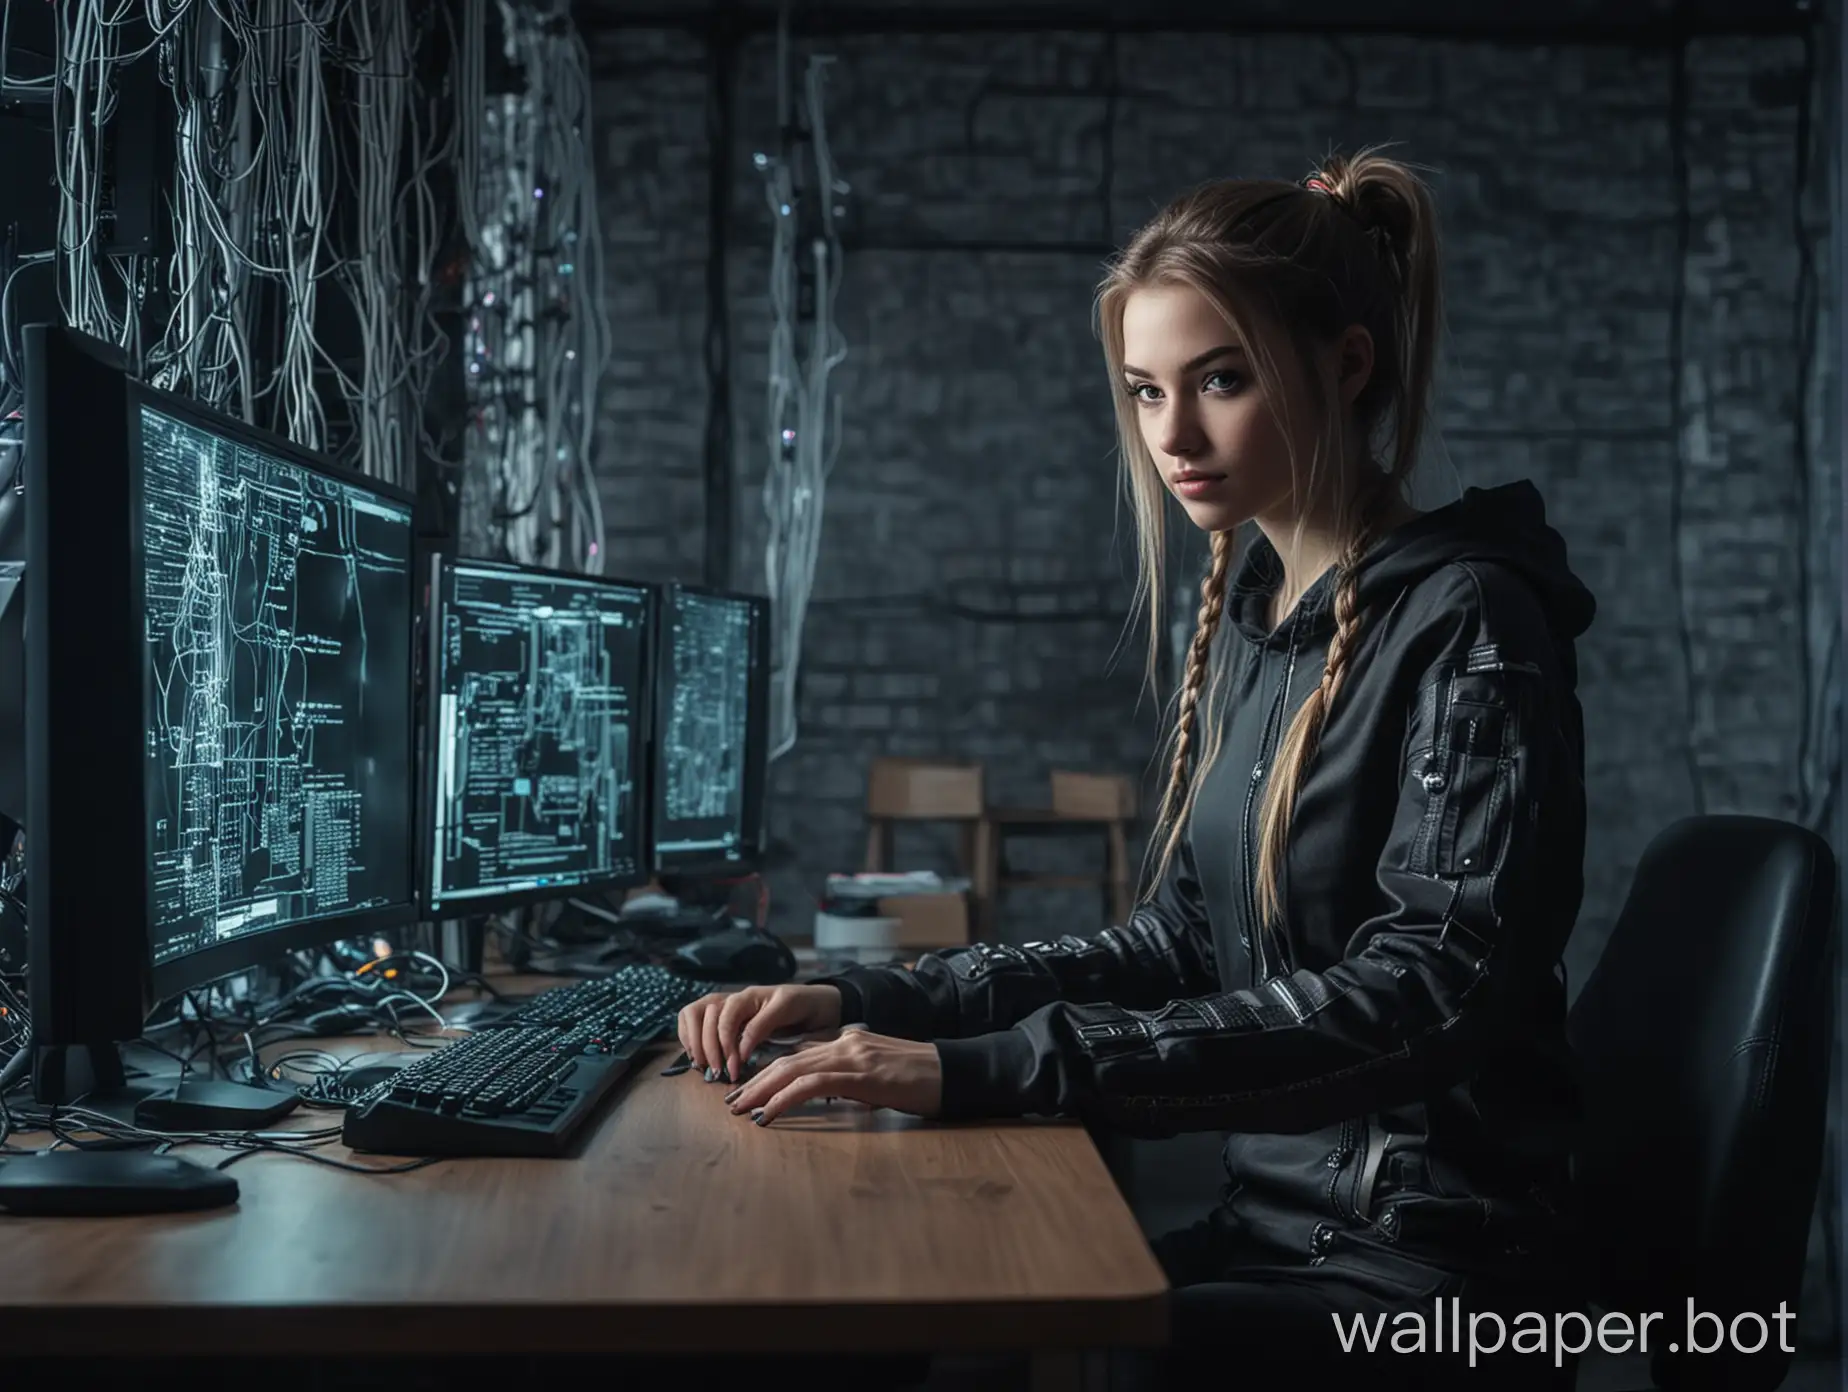 beautiful cyber girl hacker sits in a room at a table before computers. cables hang from the walls. full height. dim lighting. brightly glowing computer monitors in the background. in the genre of science fiction